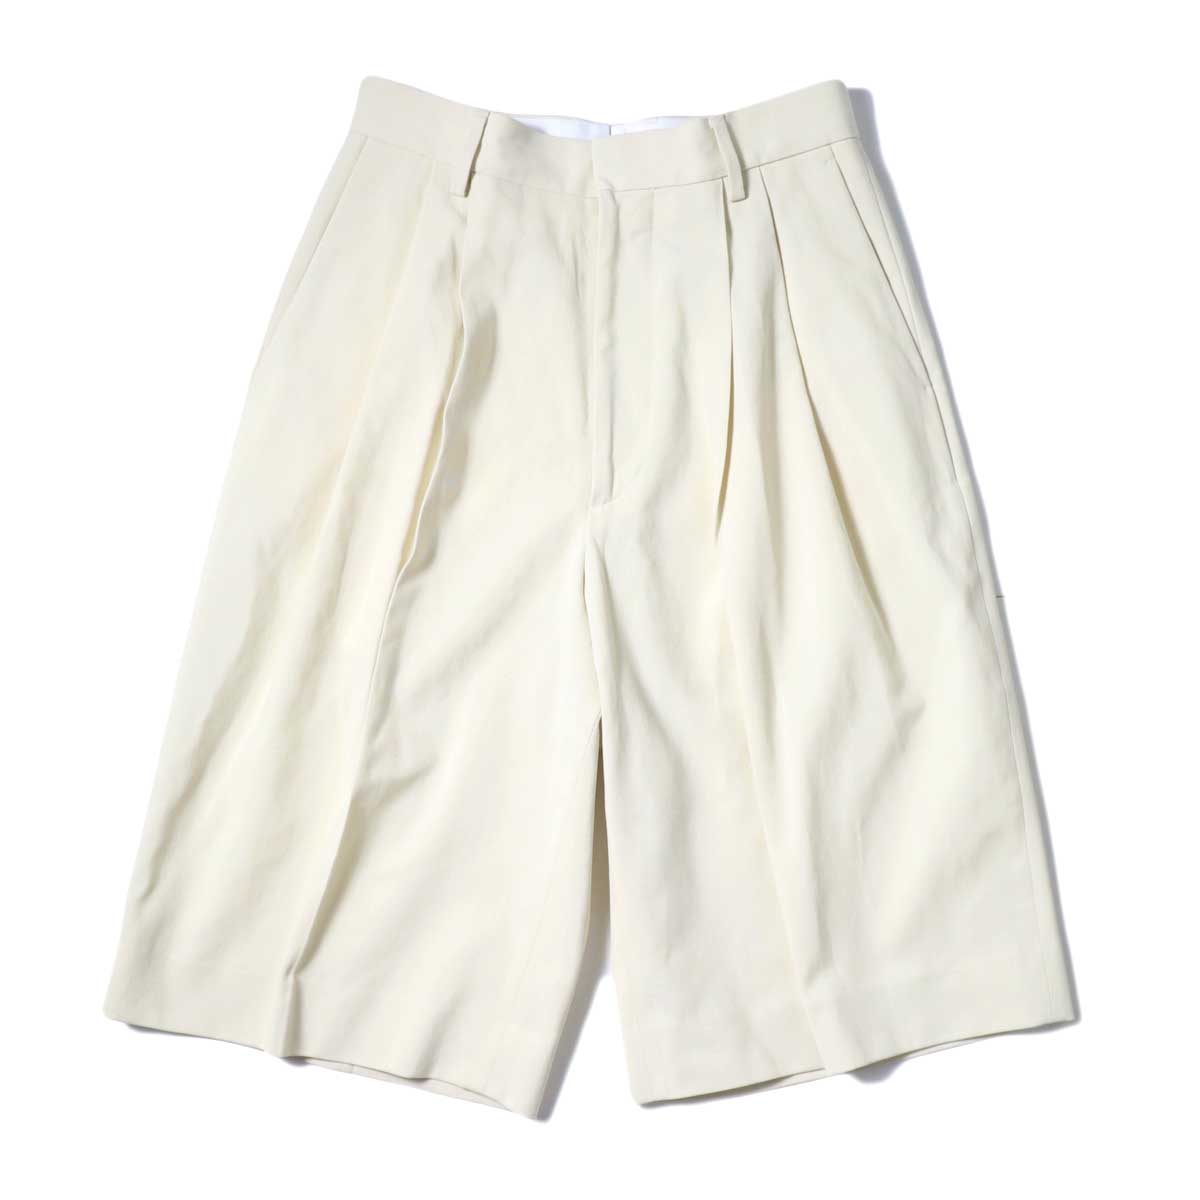 YLEVE / HIGH COUNT COTTON KERSEY SHORTS (Straw Beige)